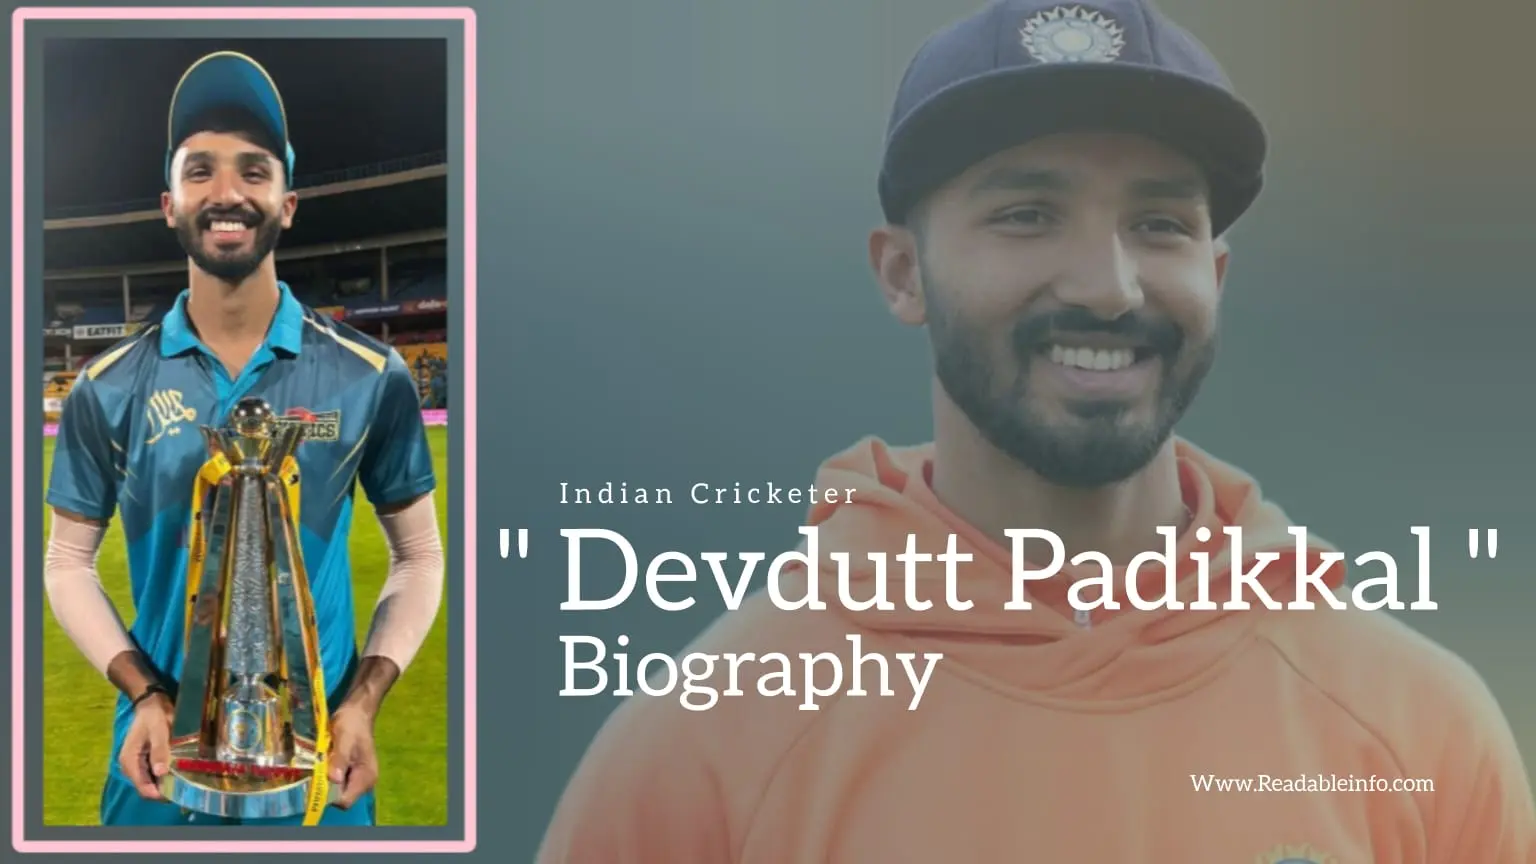 You are currently viewing Devdutt Padikkal Biography (Indian Cricketer)